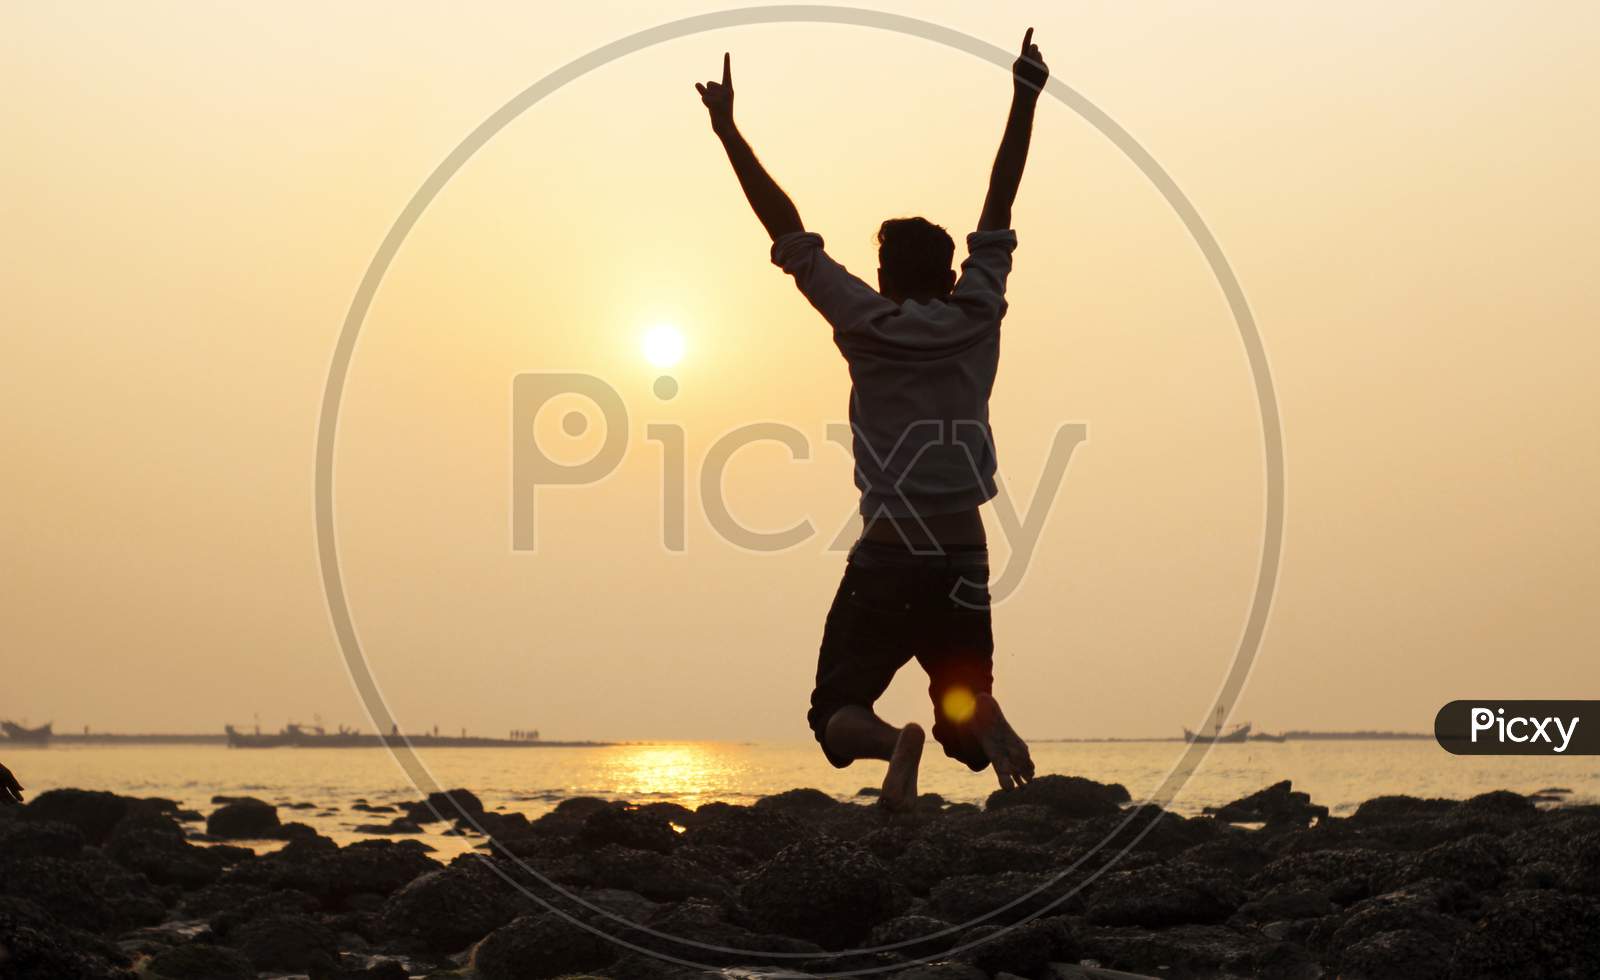 A Young Man Jump And Expressed Hands Up During Nature Sunset At Sea Beach .